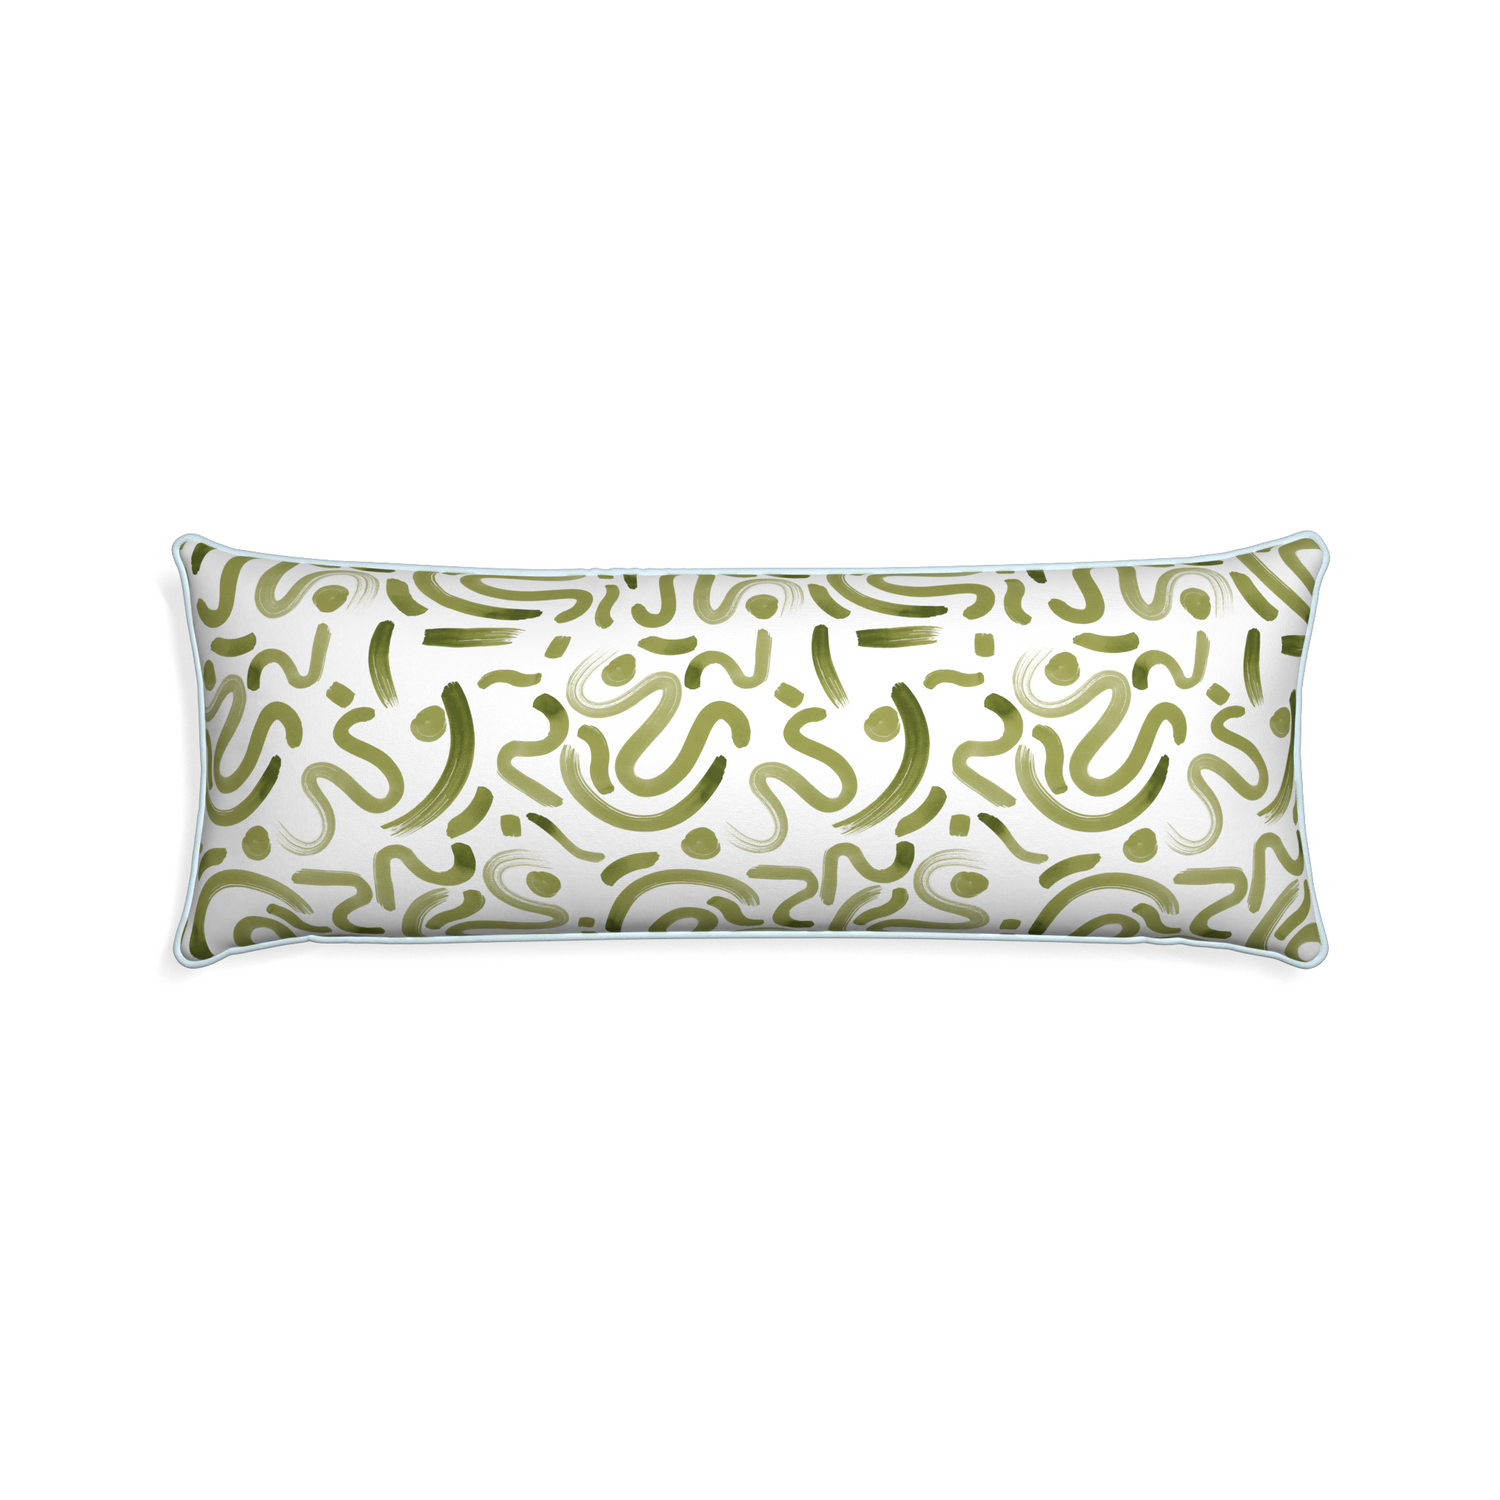 Xl-lumbar hockney moss custom pillow with powder piping on white background